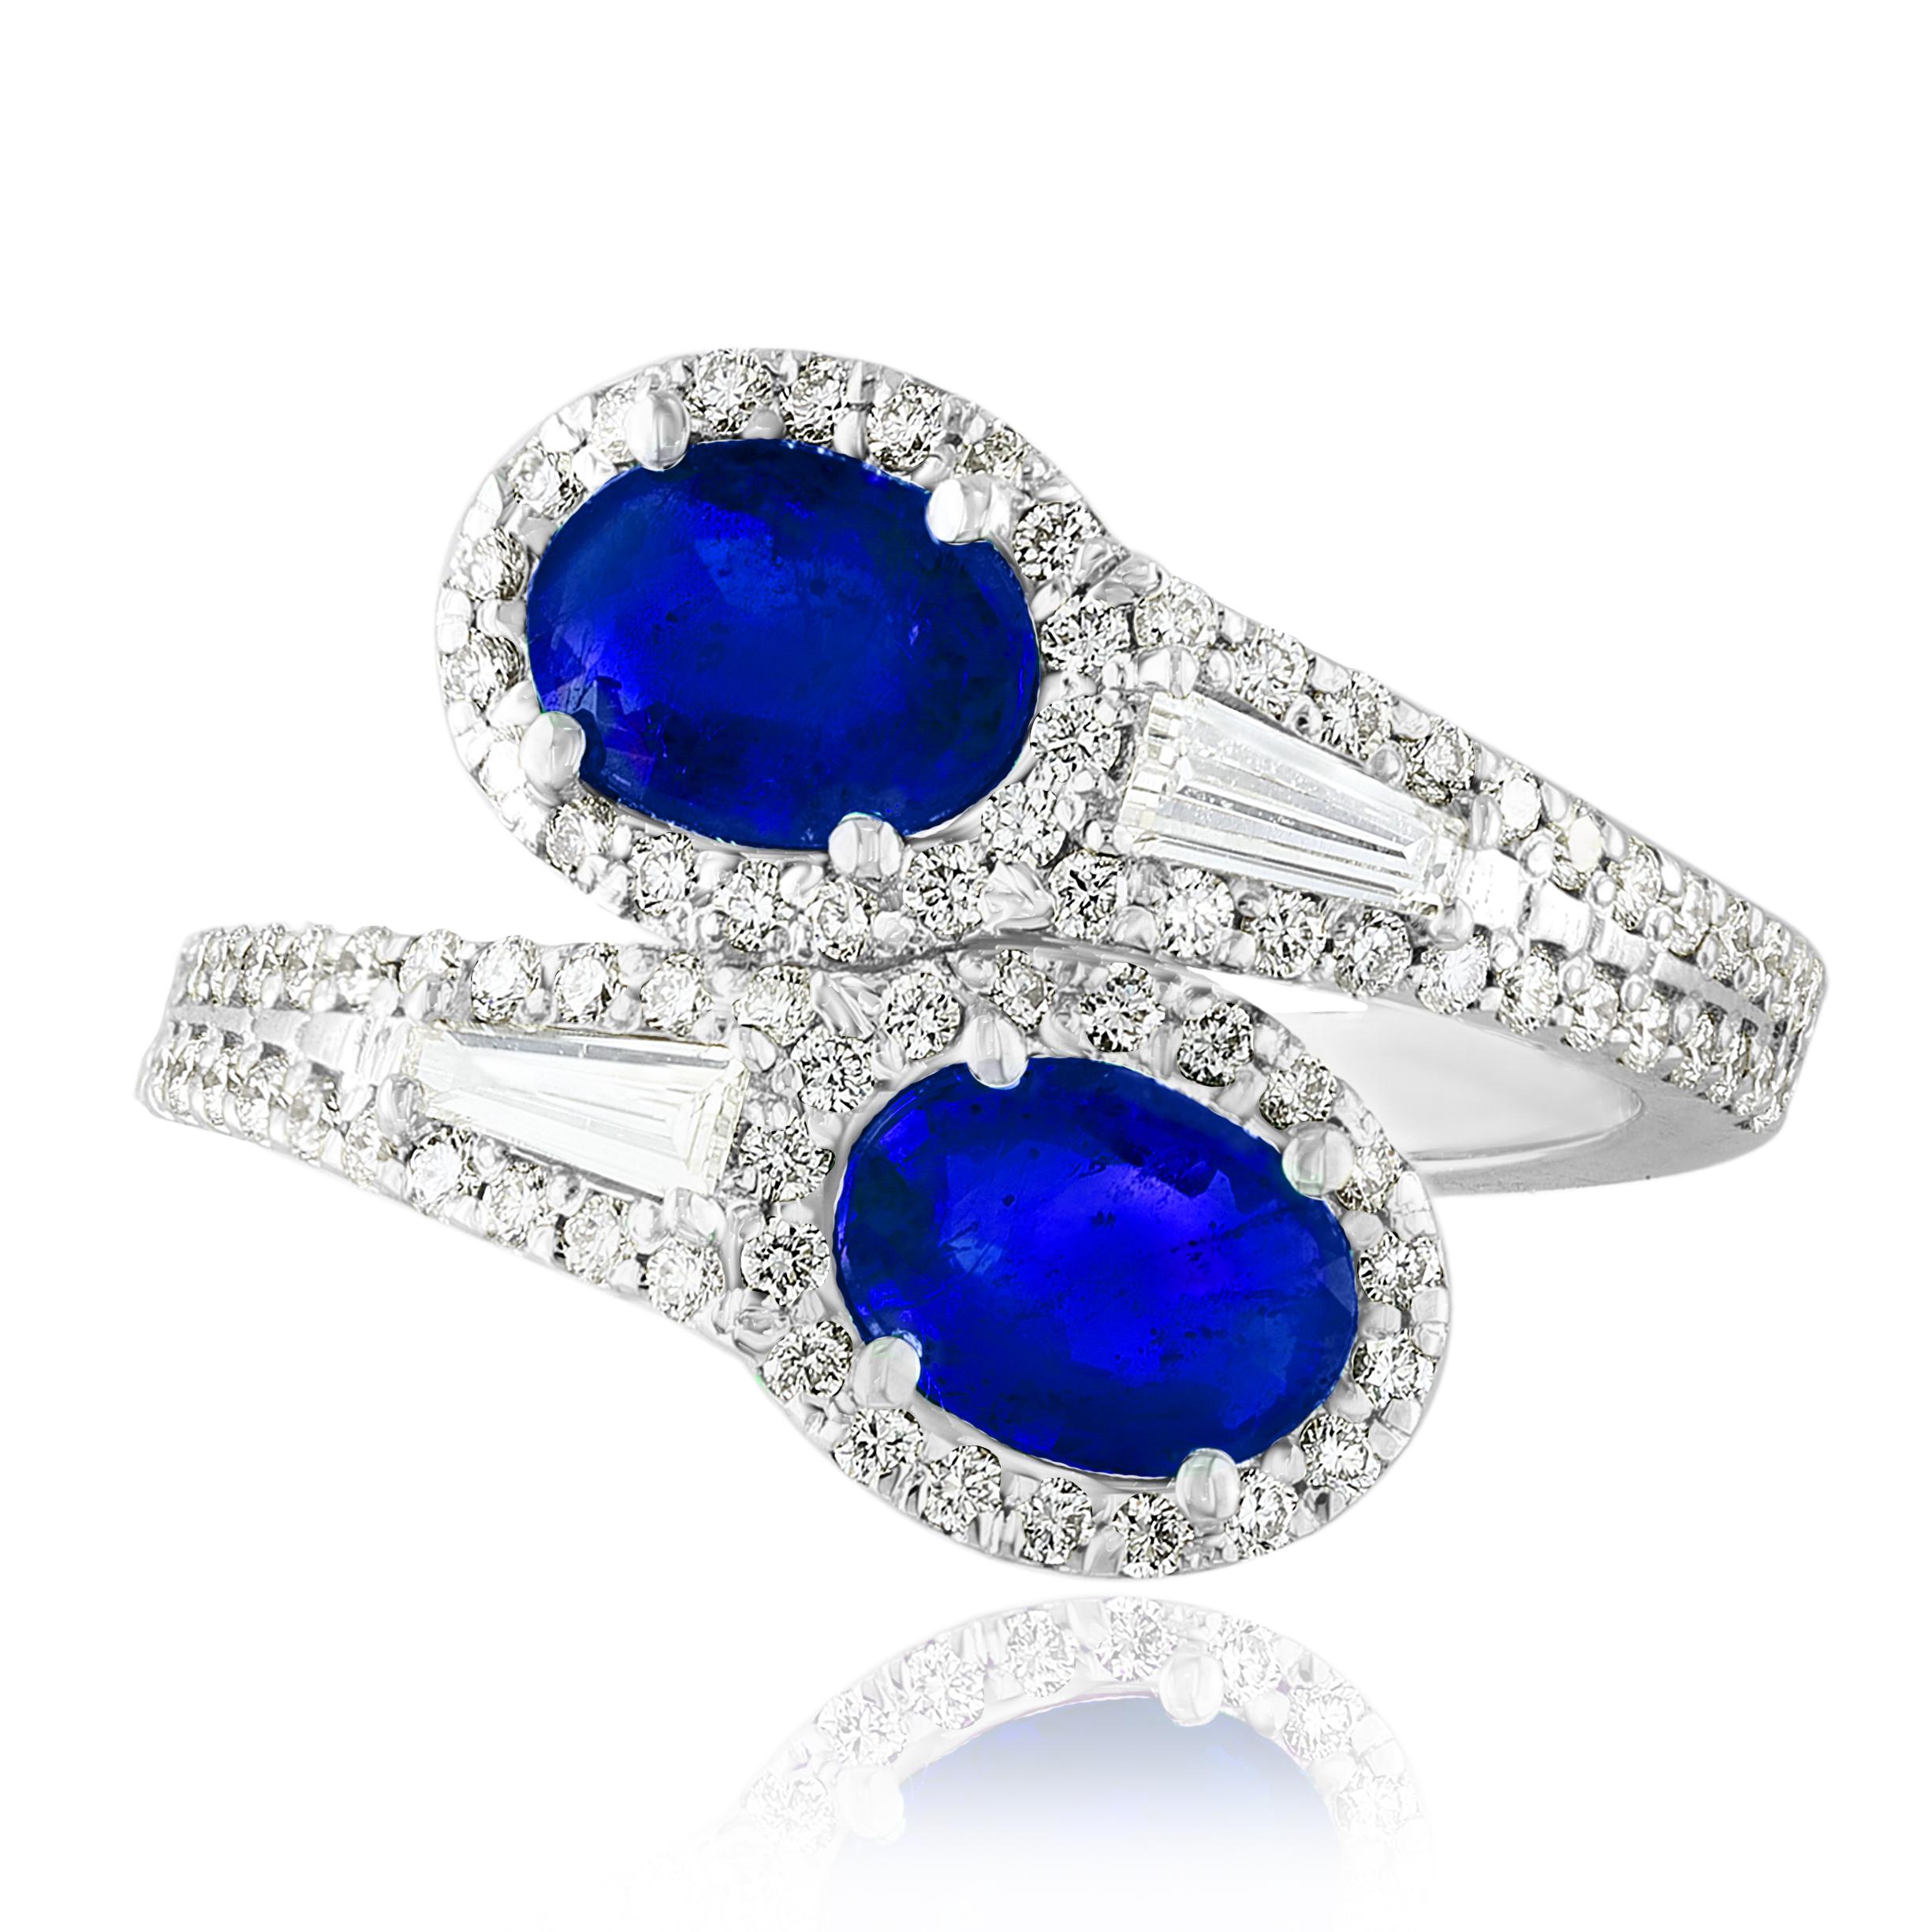 The stunning forever-together Toi et Moi ring features 2 Oval cut Sapphires embraced by east to west 2 baguette diamonds weigh and 84 round diamonds halfway to the shank. Handcrafted in 14k White Gold.
2 oval Emeralds in the center weigh 1.81 carats